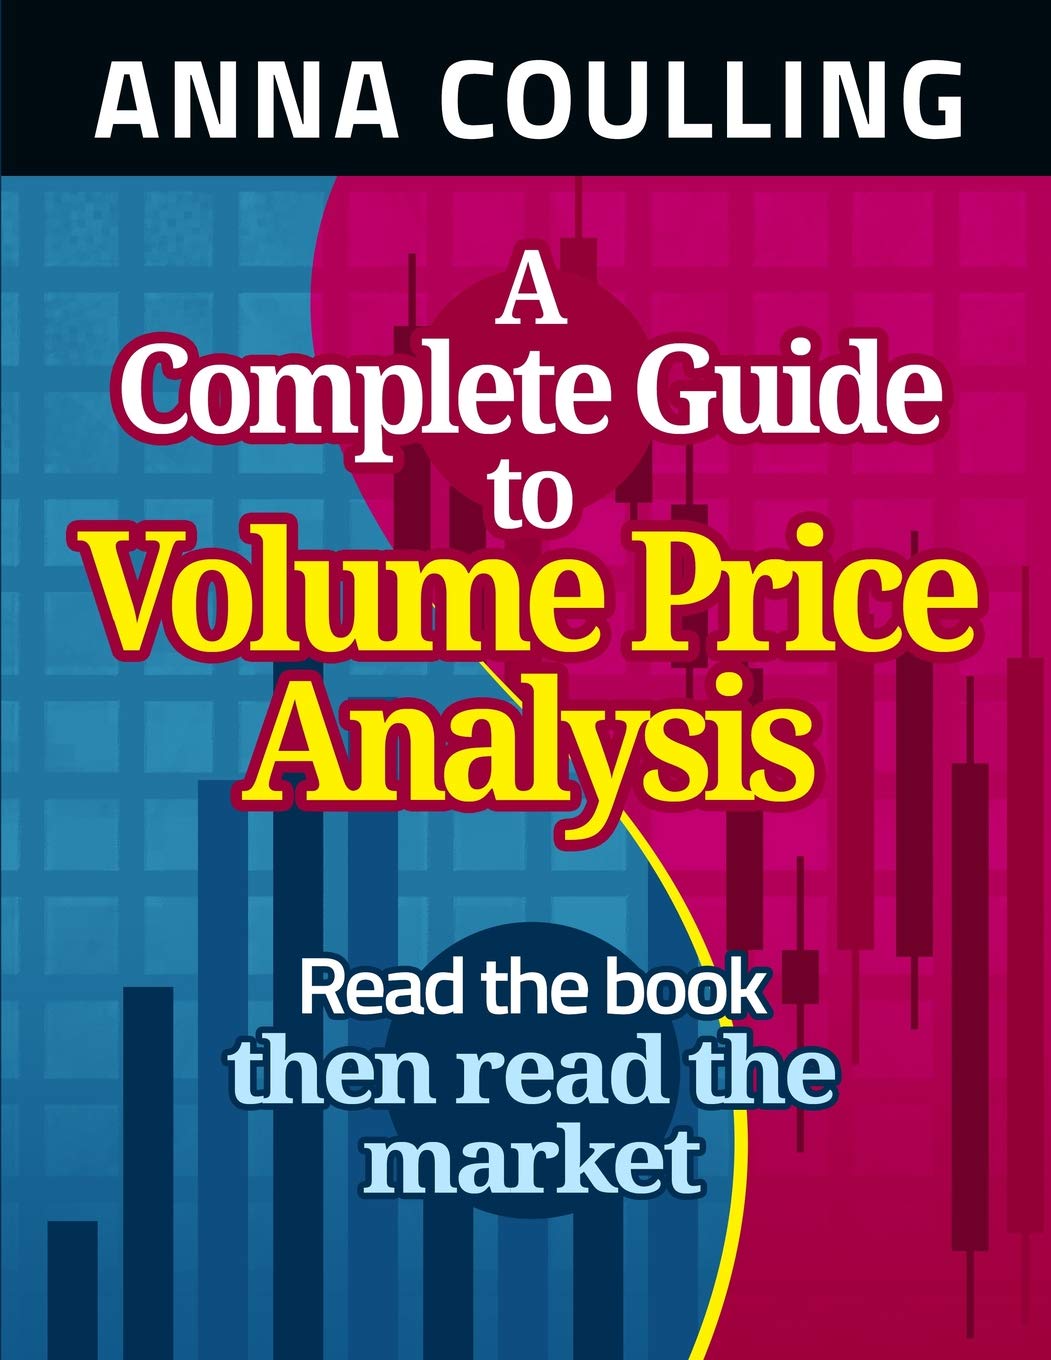 [Anna Coulling] A Complete Guide to Volume Price Analysis